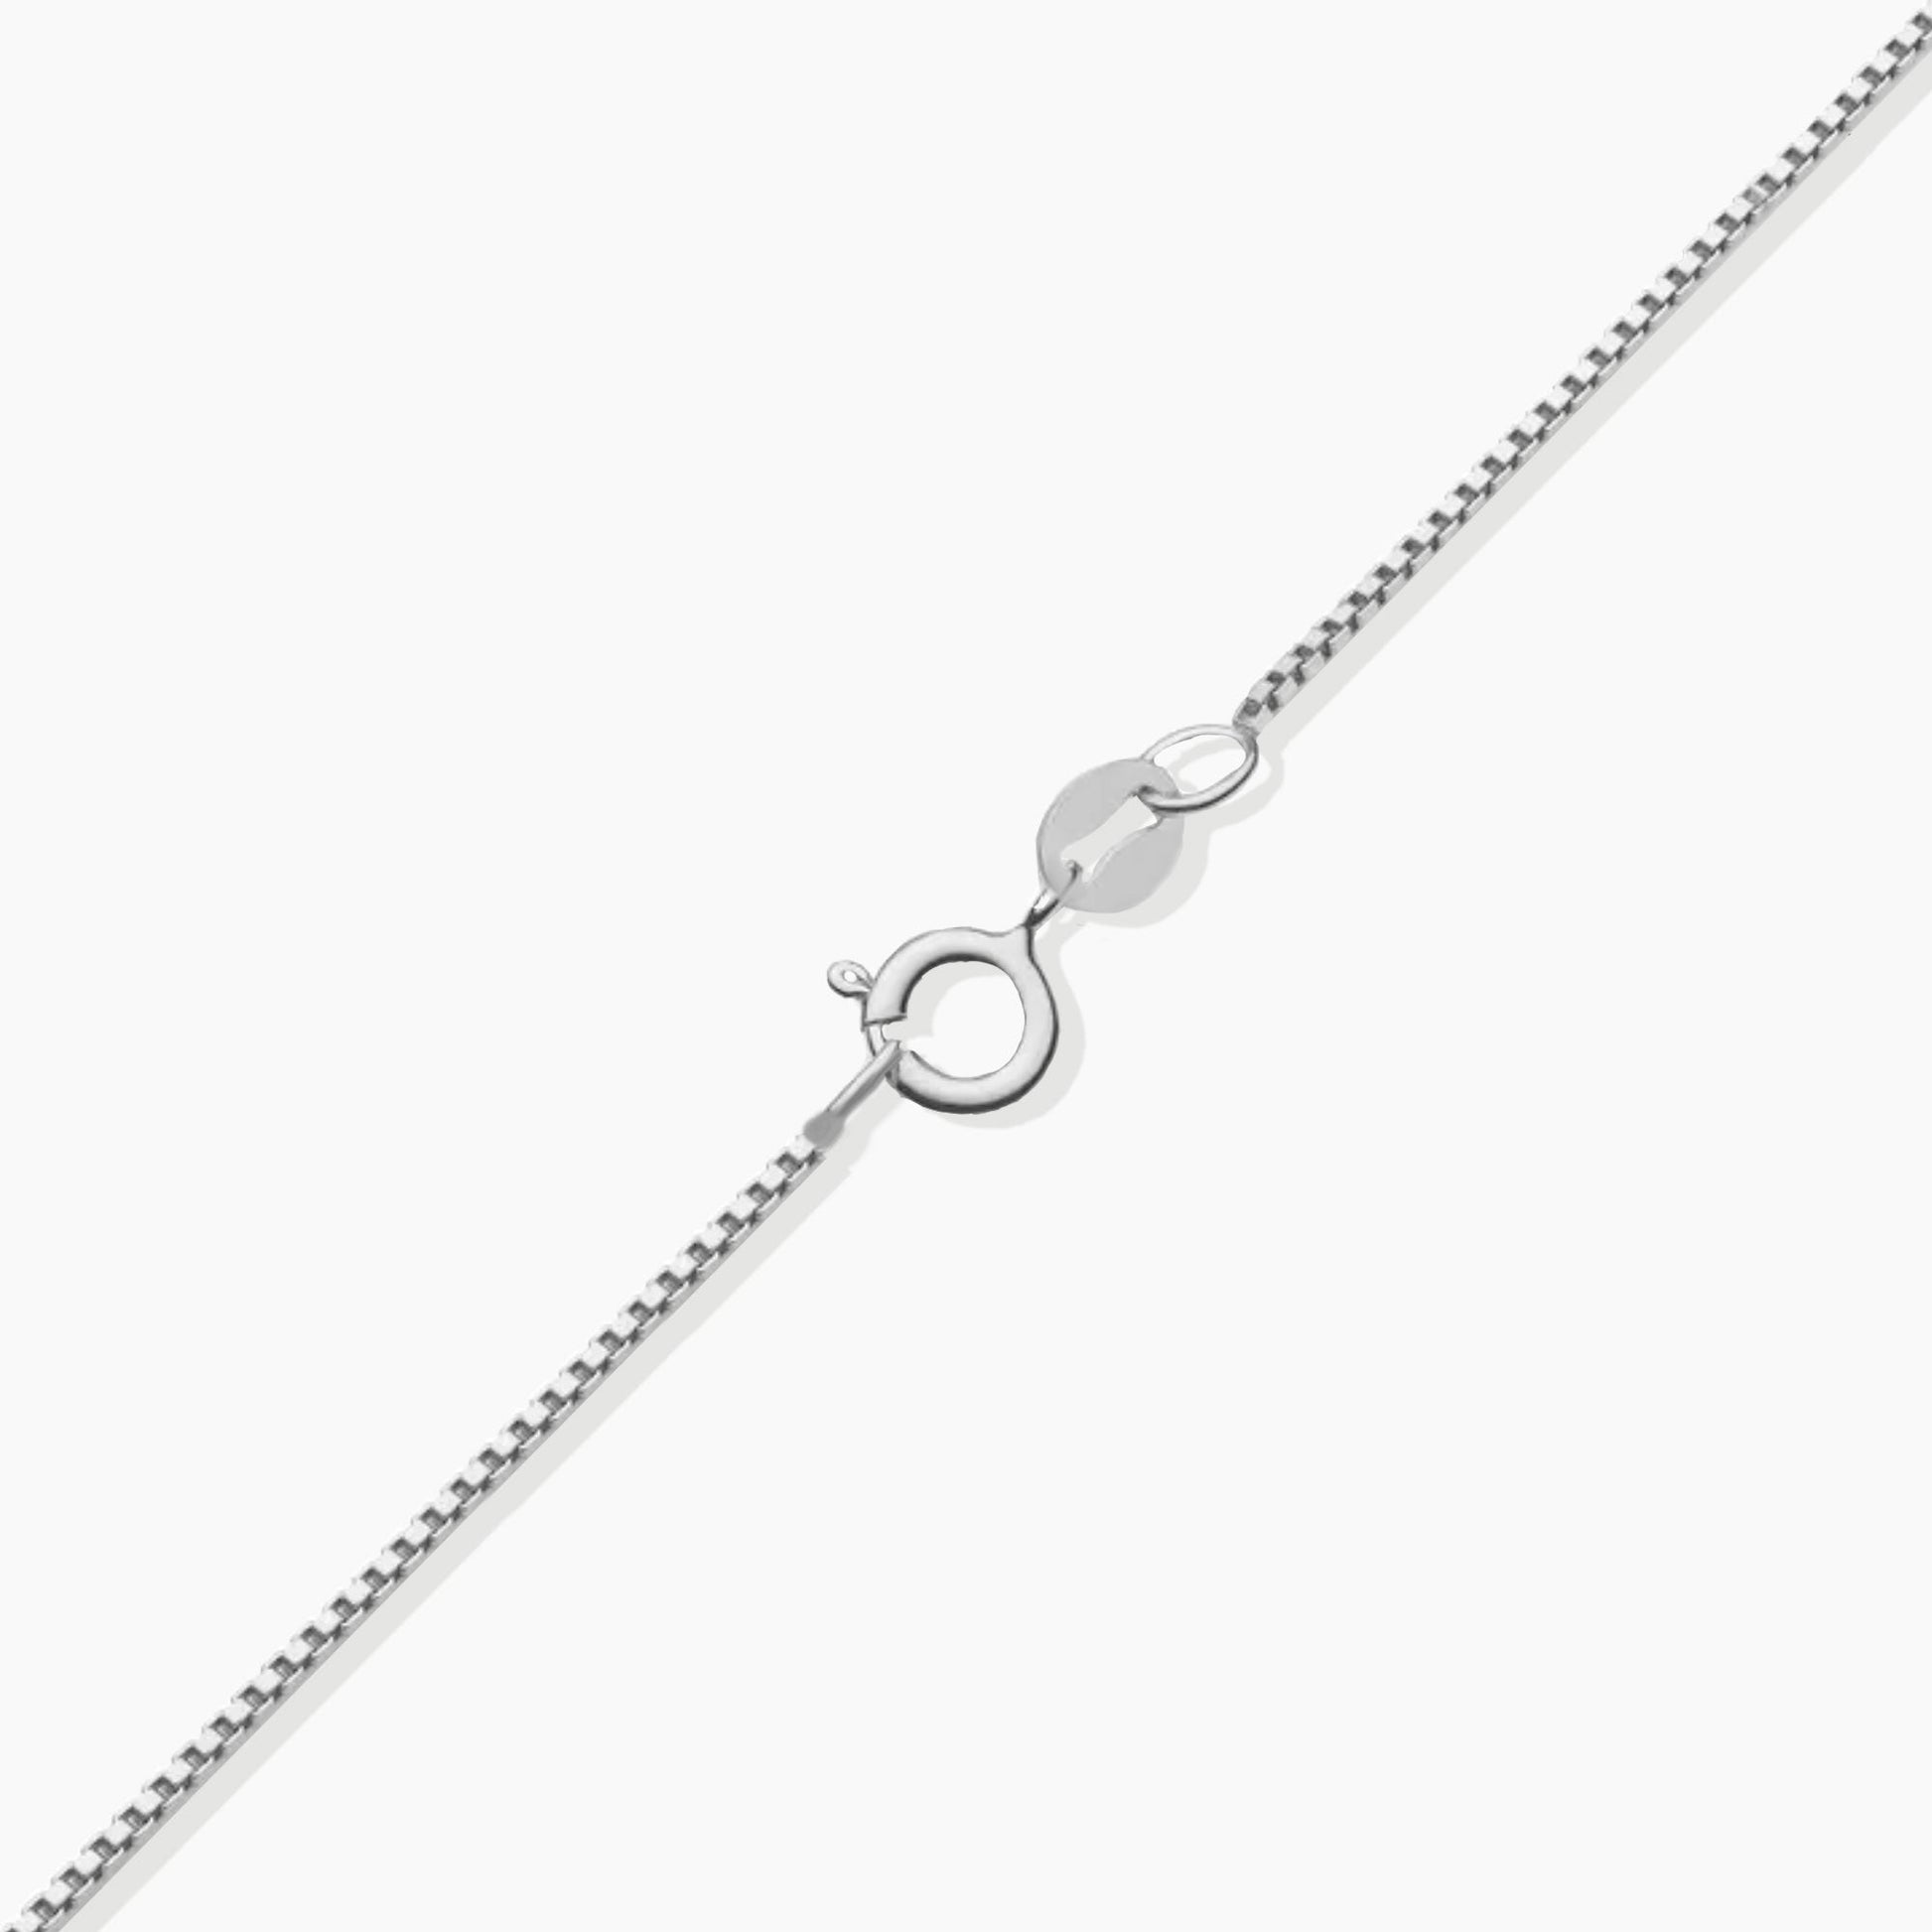 Silver box chain with spring clasp for Round Cut Swiss Blue Topaz Pendant